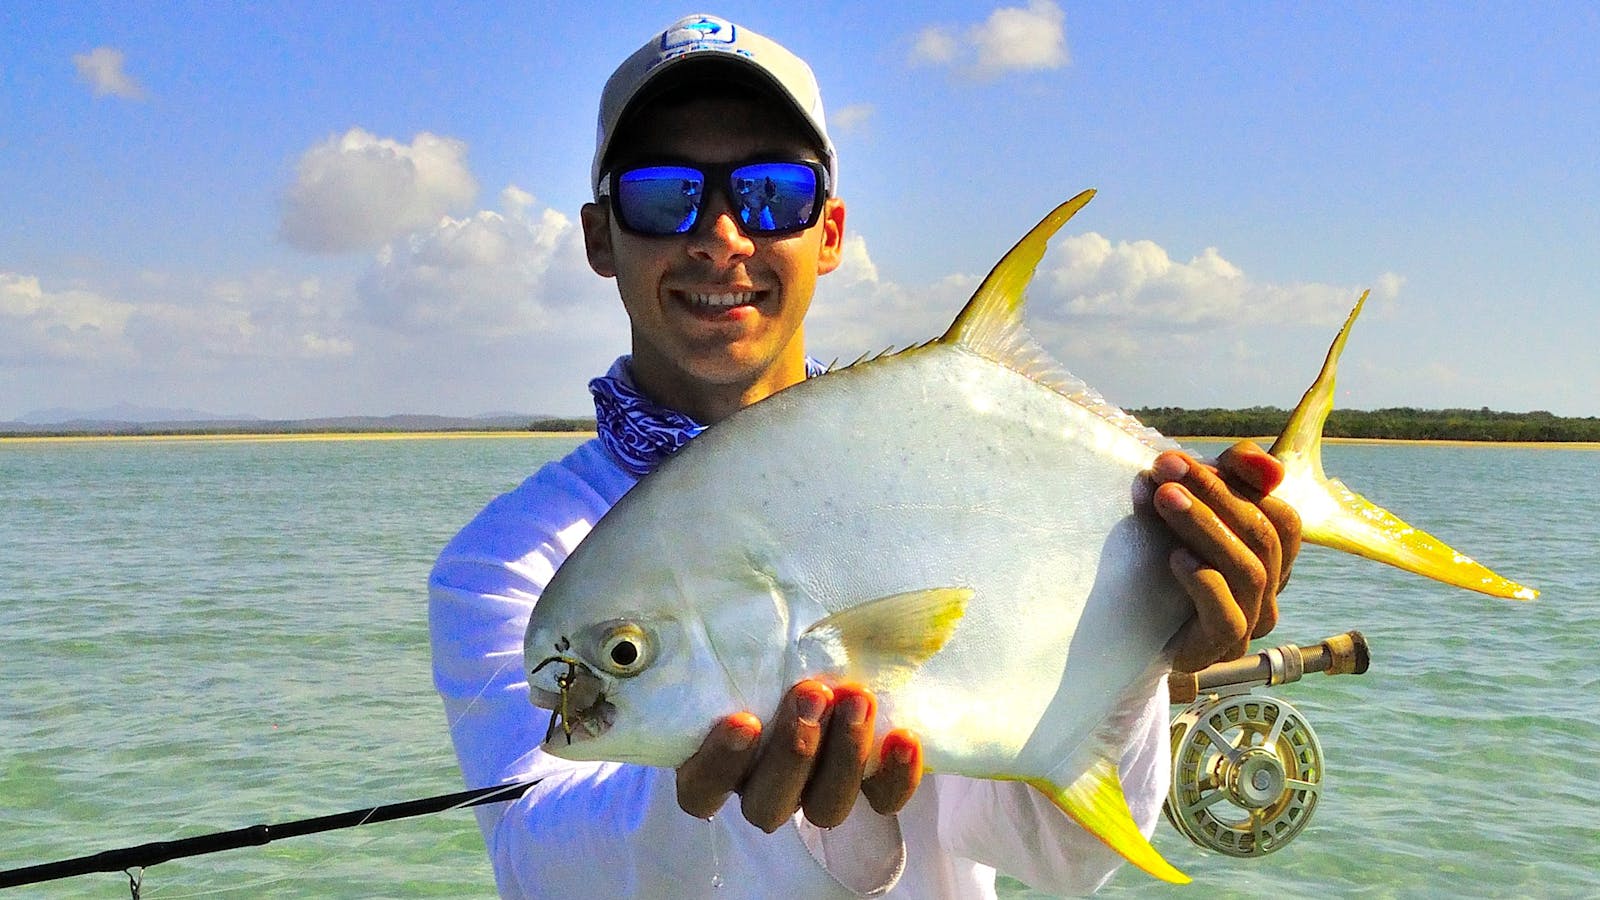 Permit on FLY!